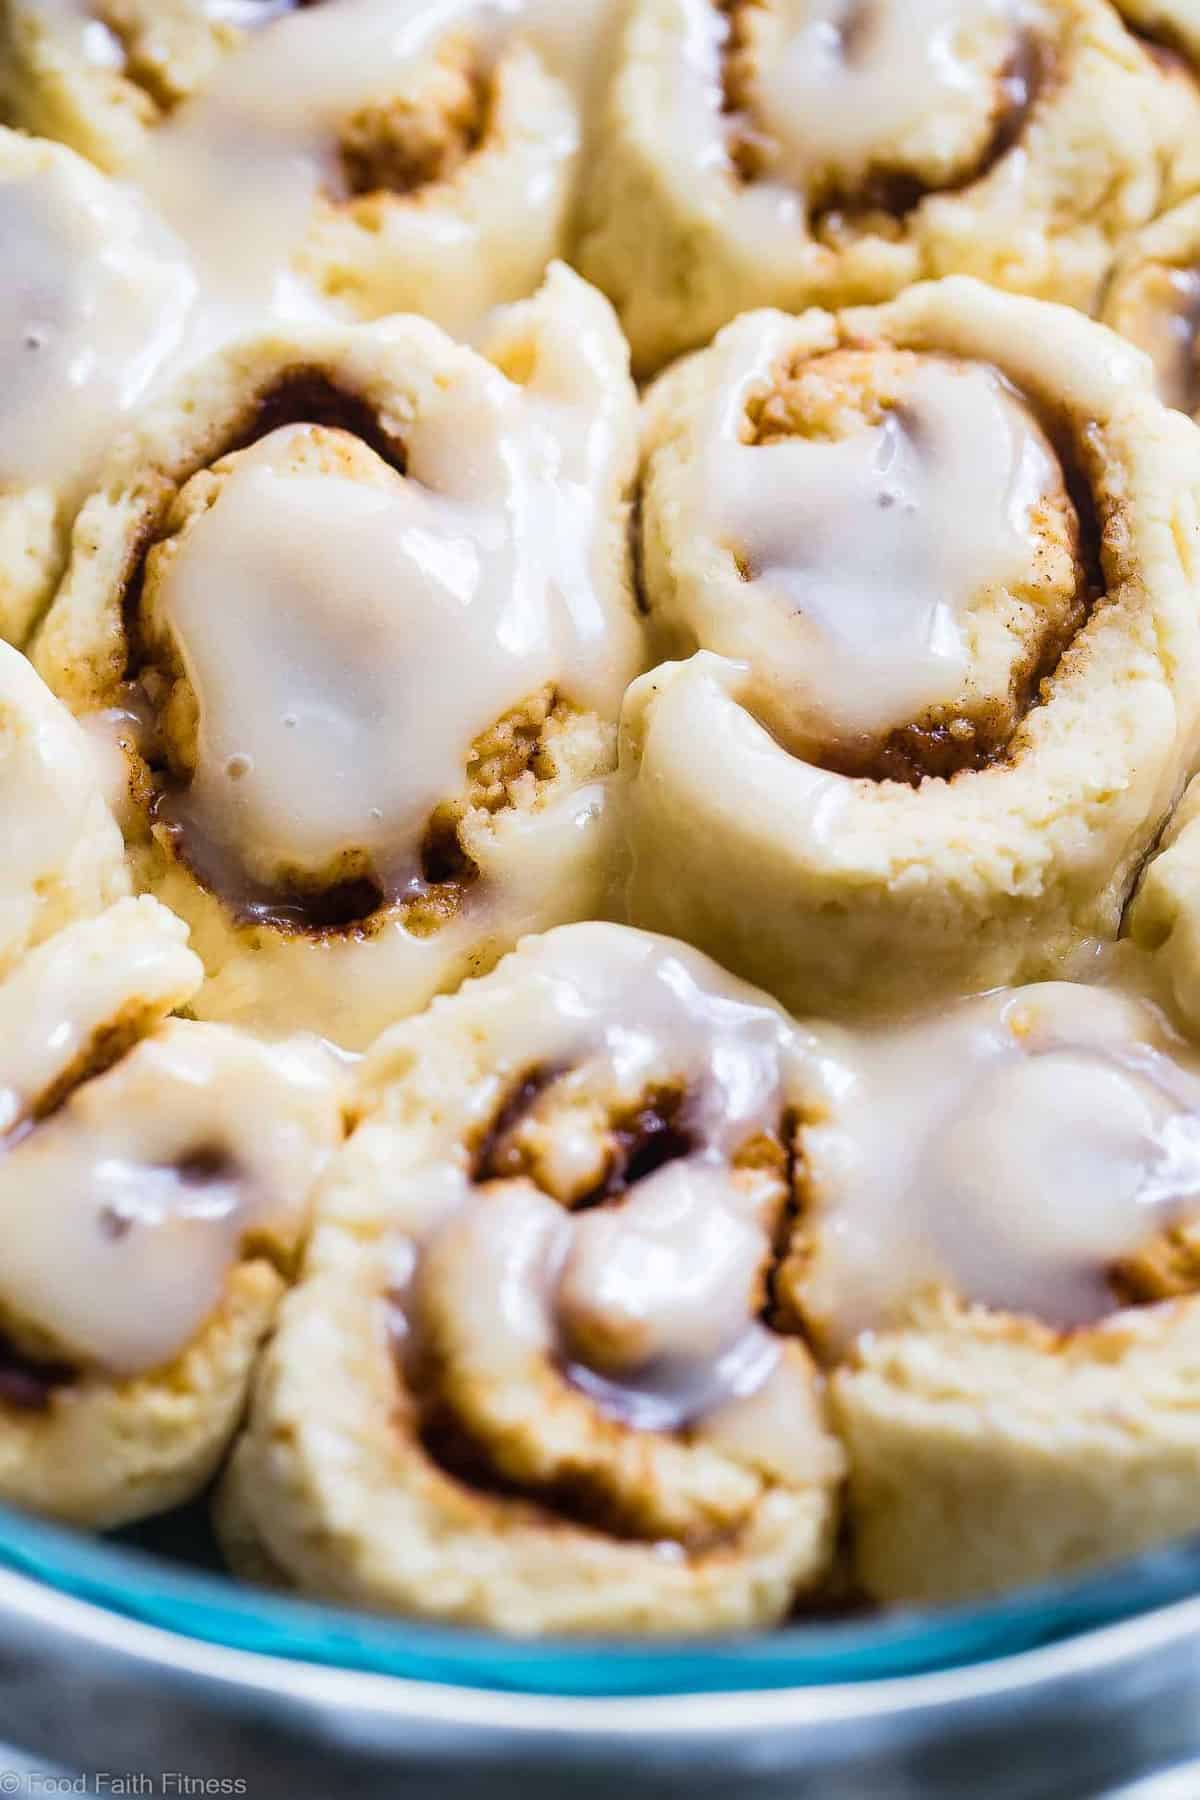 The BEST Easy Dairy Free Gluten Free Vegan Cinnamon Rolls - You will never believe that these  Cinnamon Rolls are better for you, gluten free/dairy free/egg free and under 200 calories! Soft, tender and perfectly sweet and spicy! | #Foodfaithfitness | #Glutenfree #Healthy #Vegan #DairyFree #EggFree